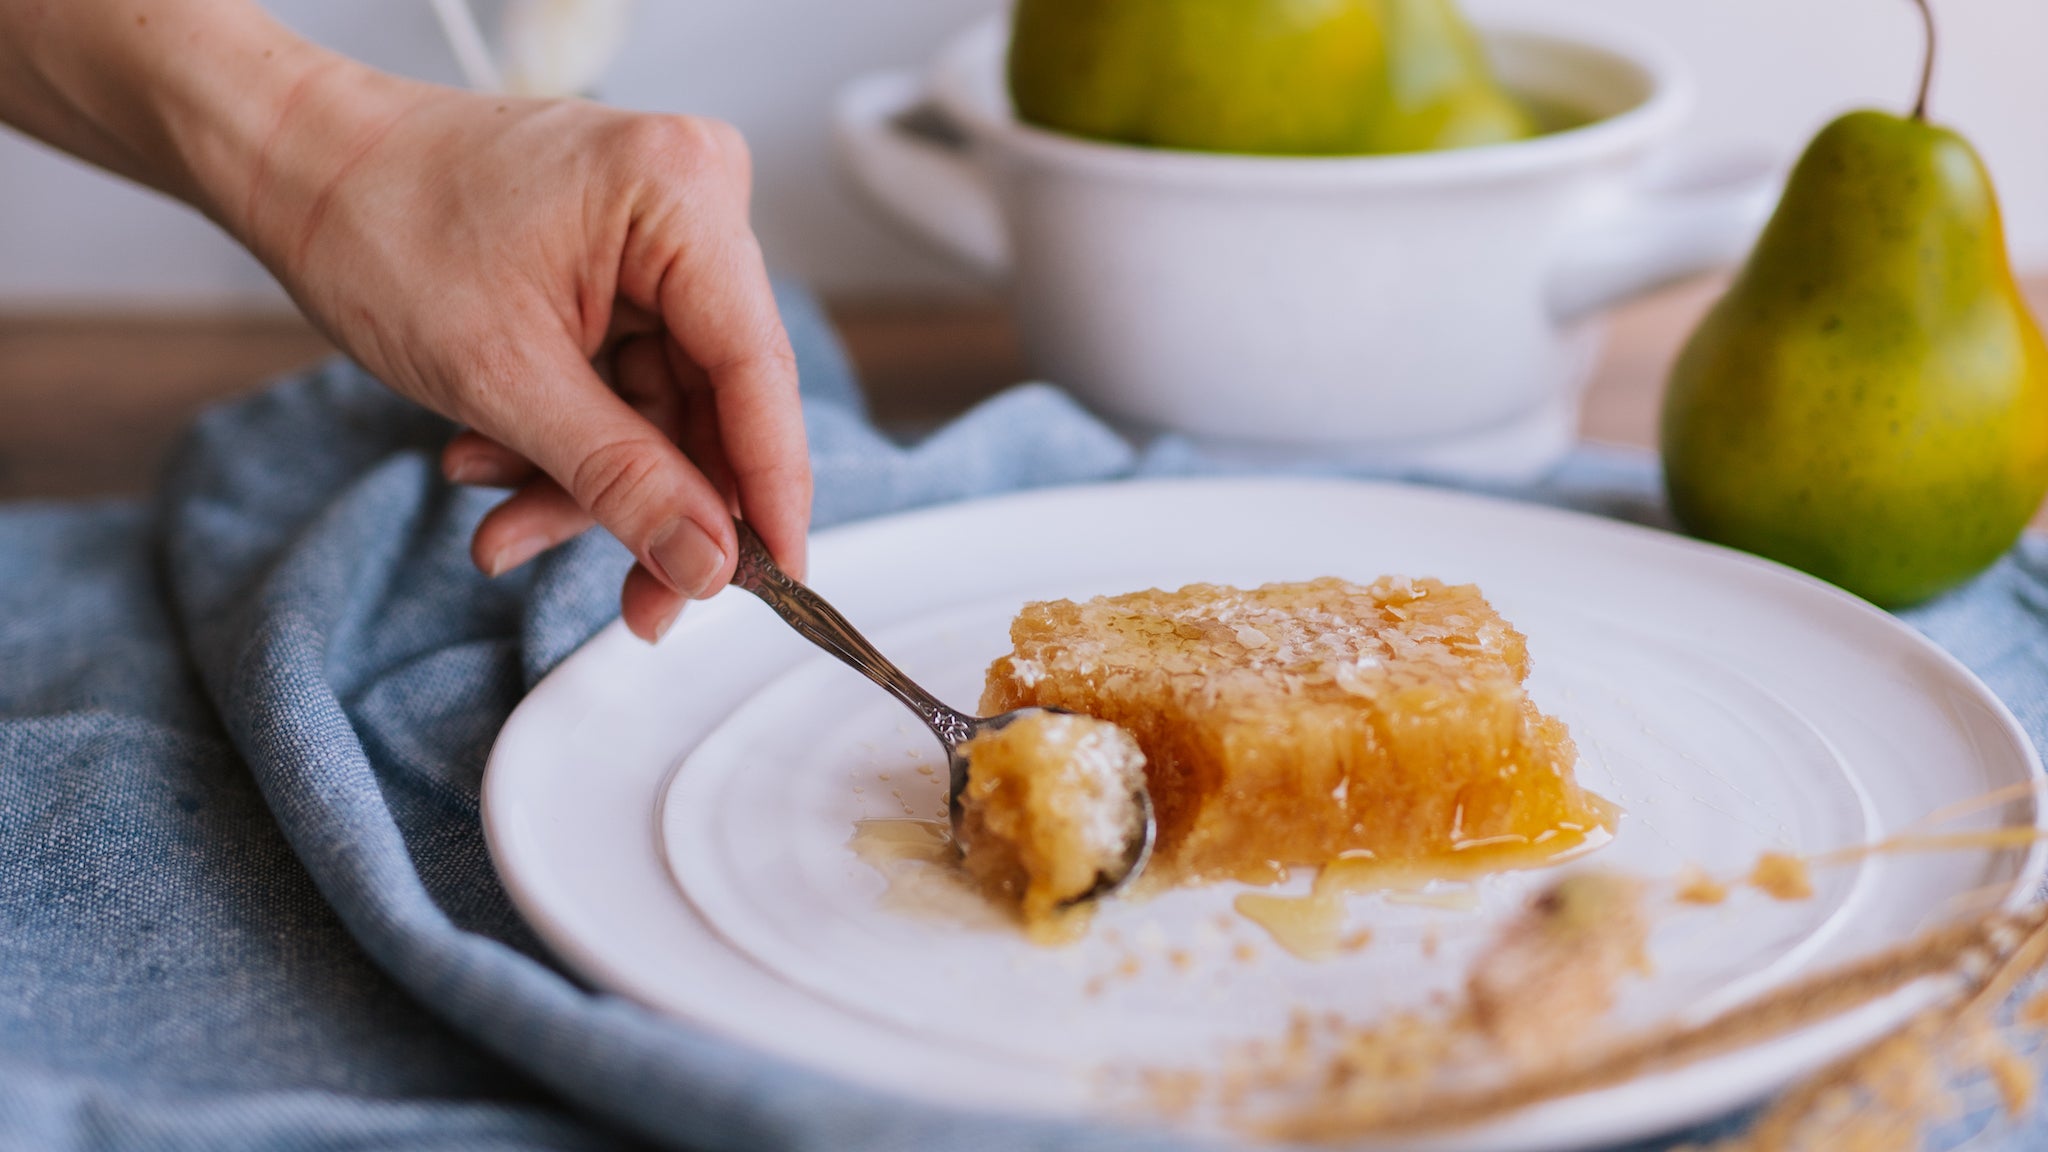 hand scooping a bite of honeycomb on a white plate